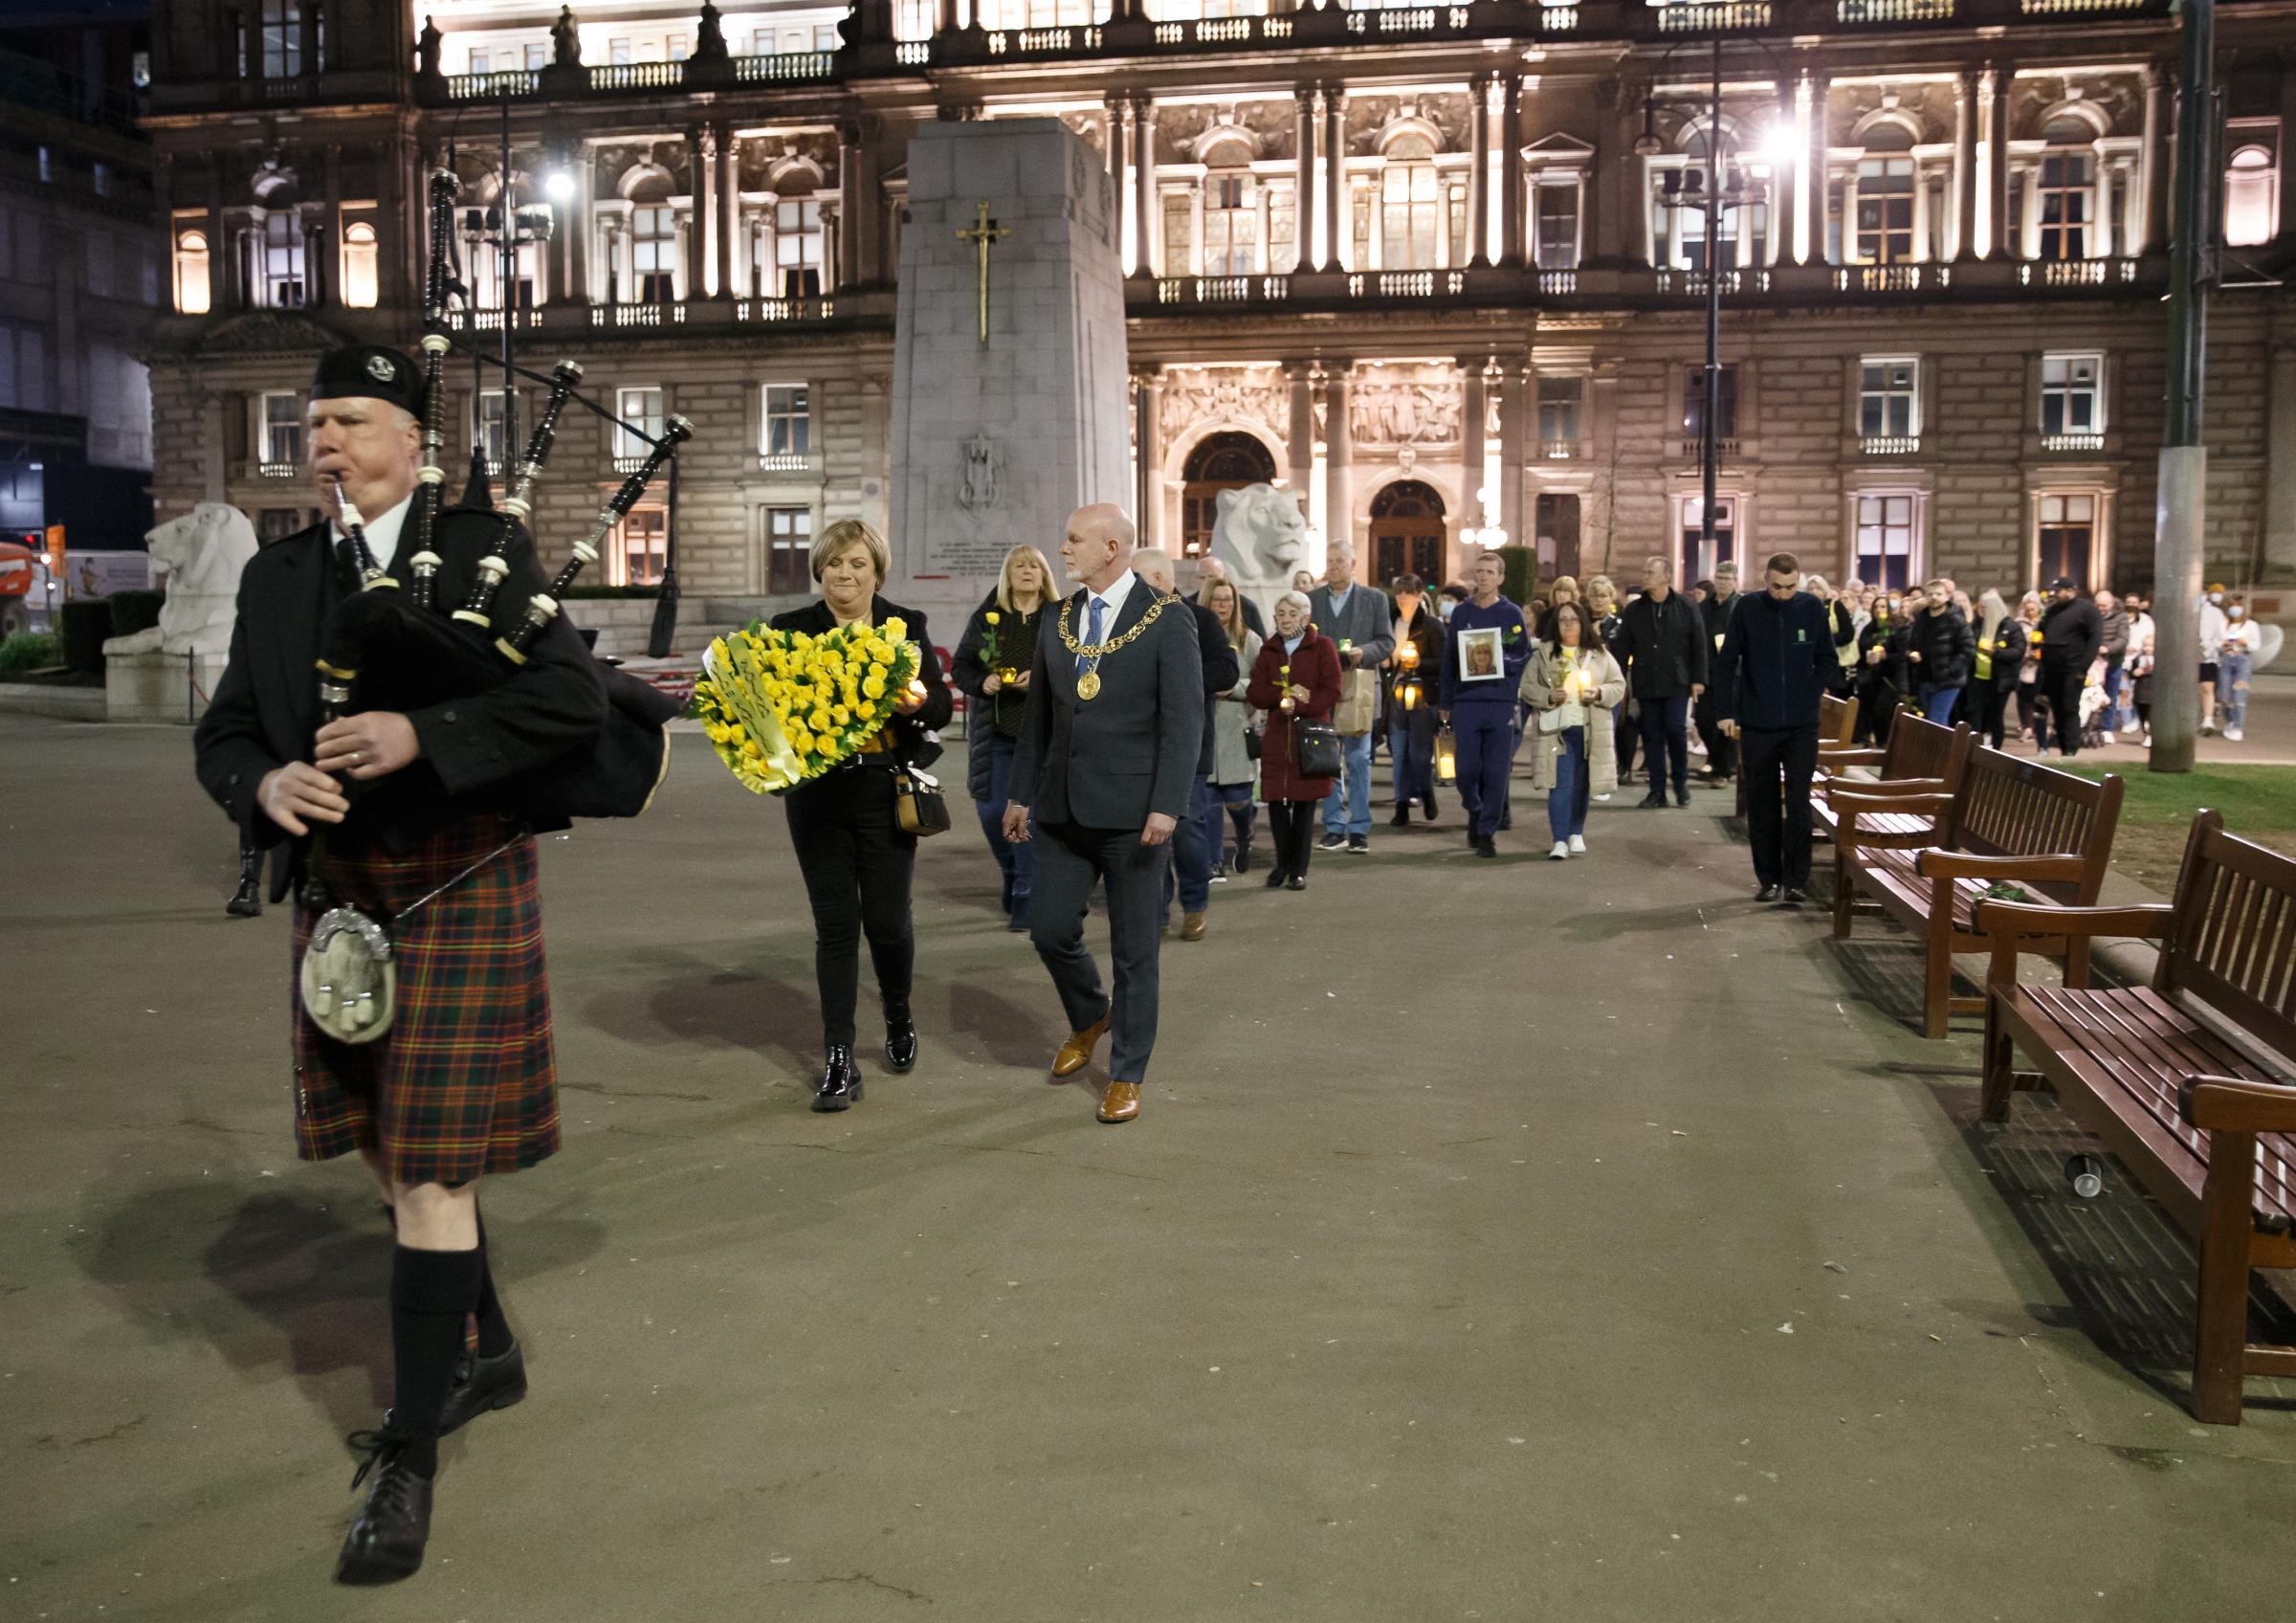 Vigil at George Square, Glasgow to mark the second national lockdown anniversary. The event attended by families who lost loved ones in the covid pandemic was organised by Covid 19 Families Scotland. Pictured is a piper leading the vigil into the square,